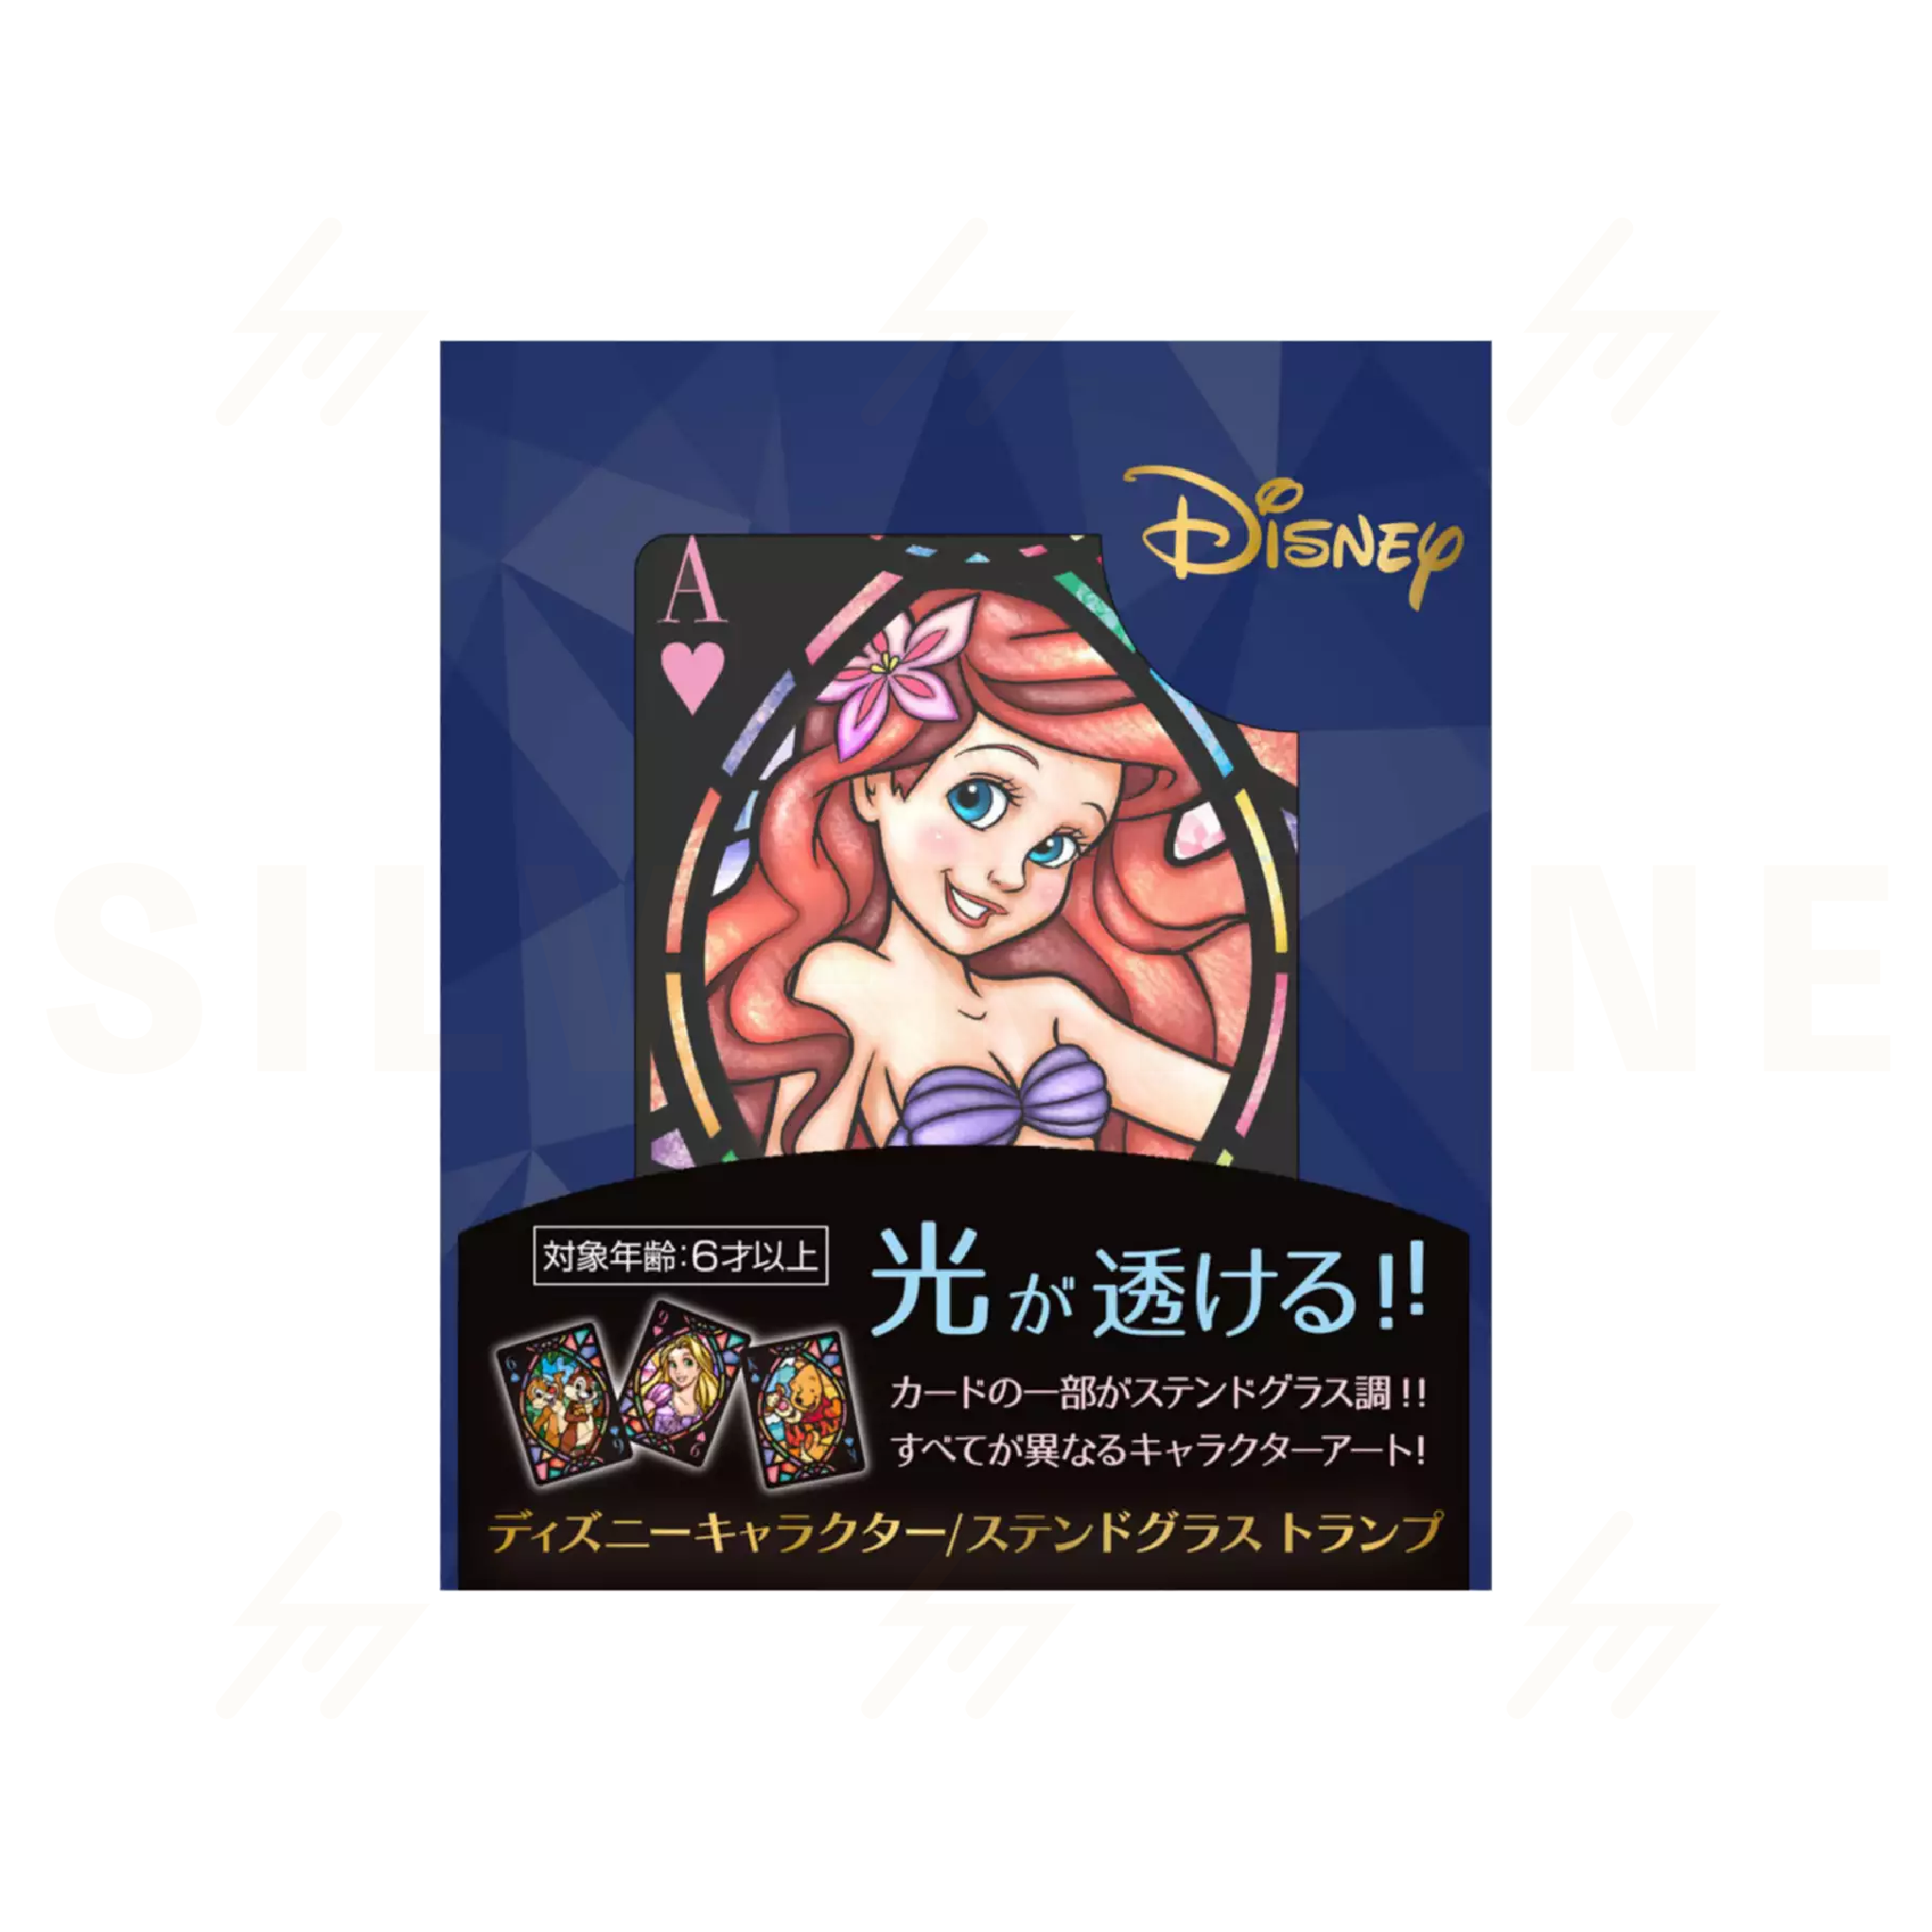 Tenyo - Disney Characters Stained Glass Playing Cards